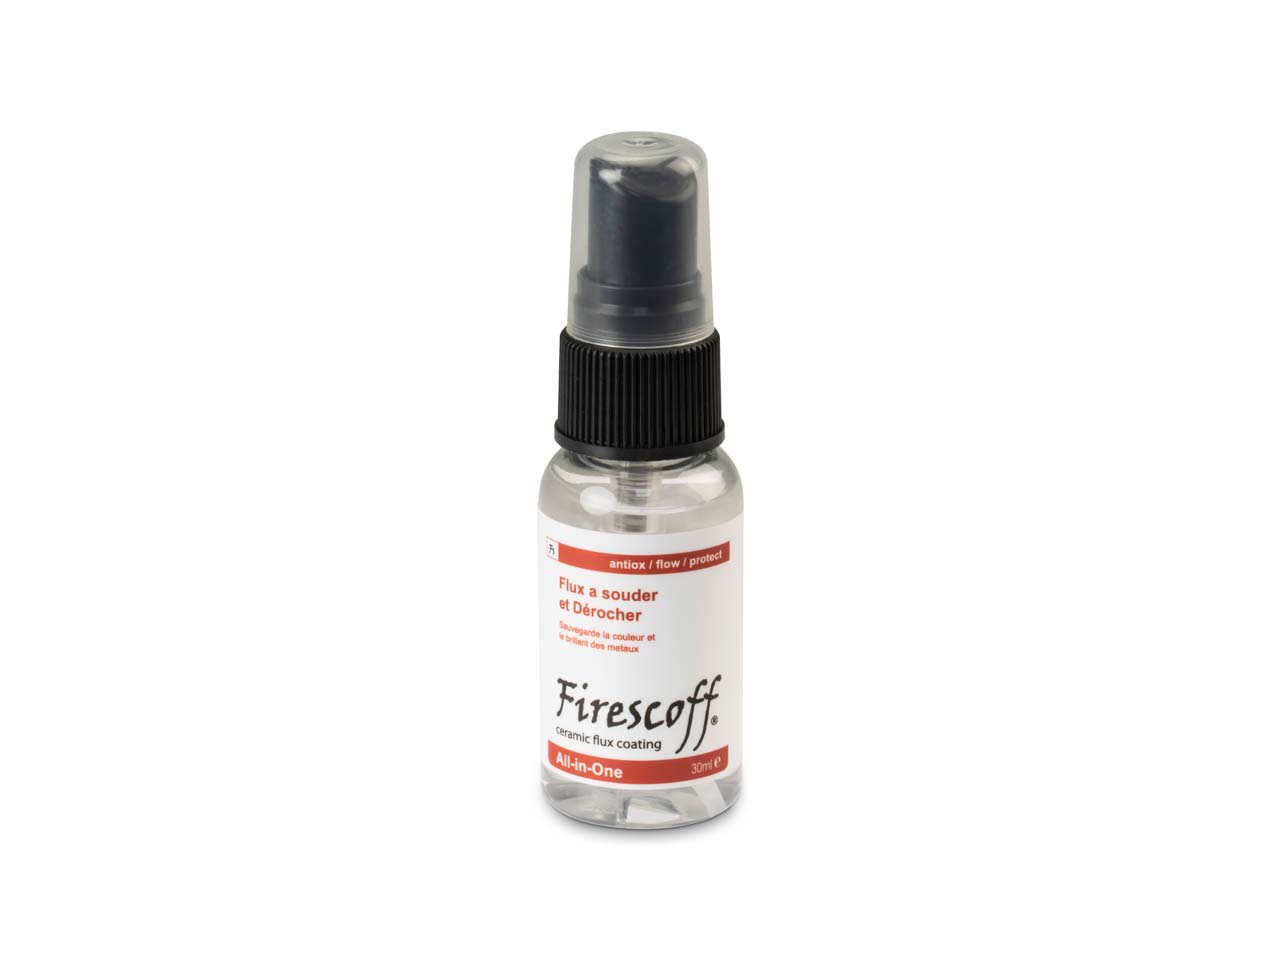 Do you have instructions for Firescoff� Ceramic Flux 30ml?